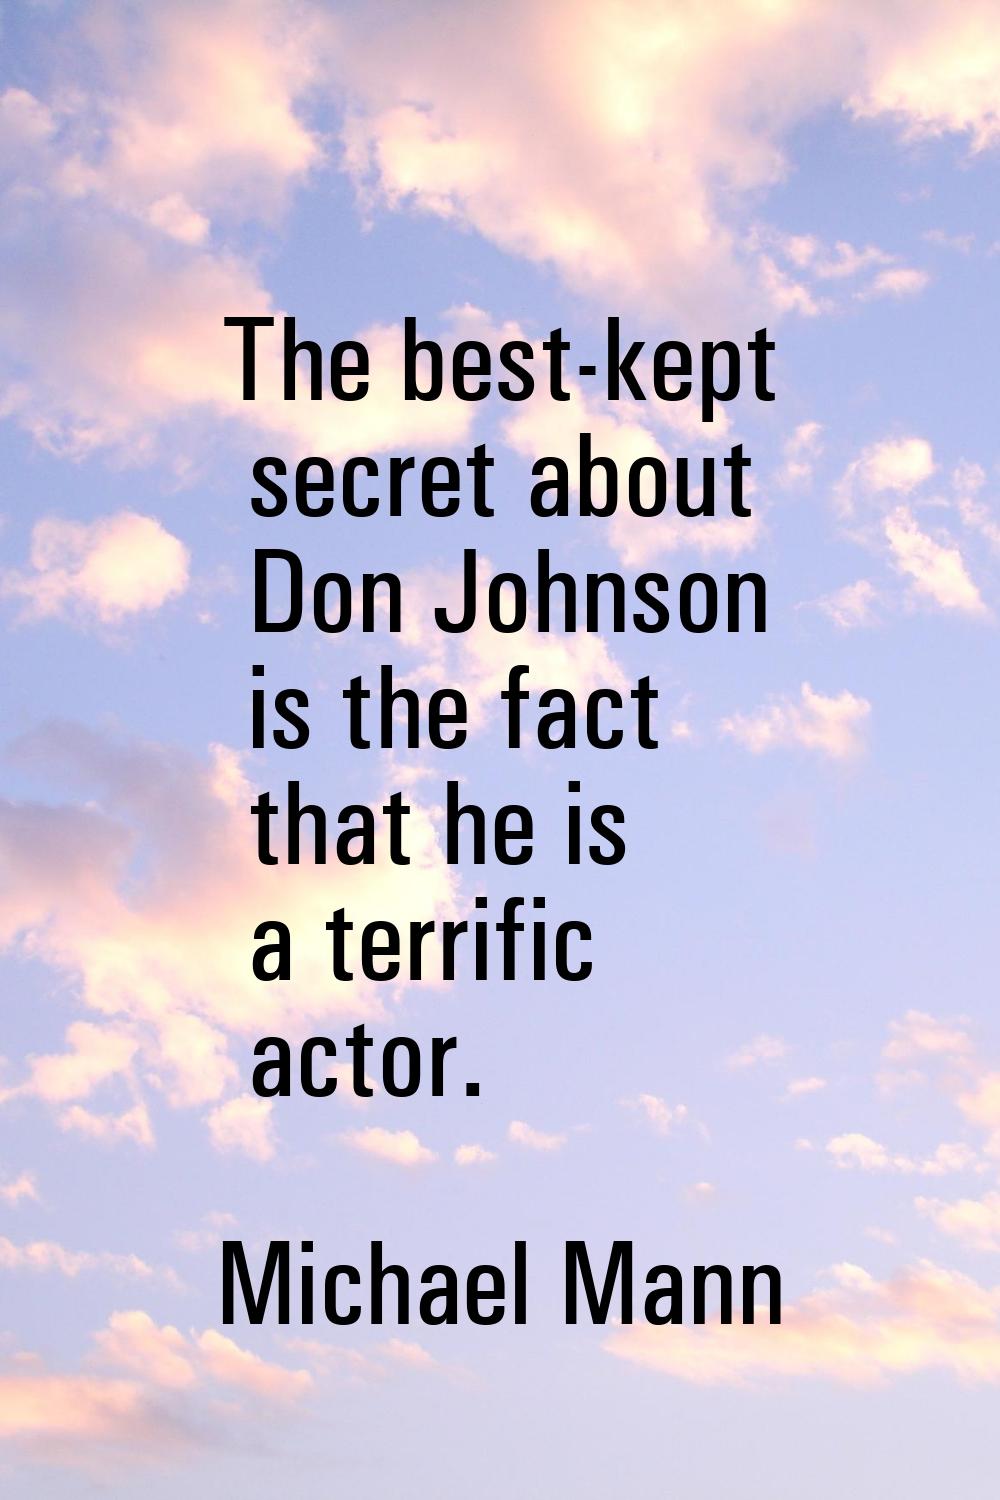 The best-kept secret about Don Johnson is the fact that he is a terrific actor.